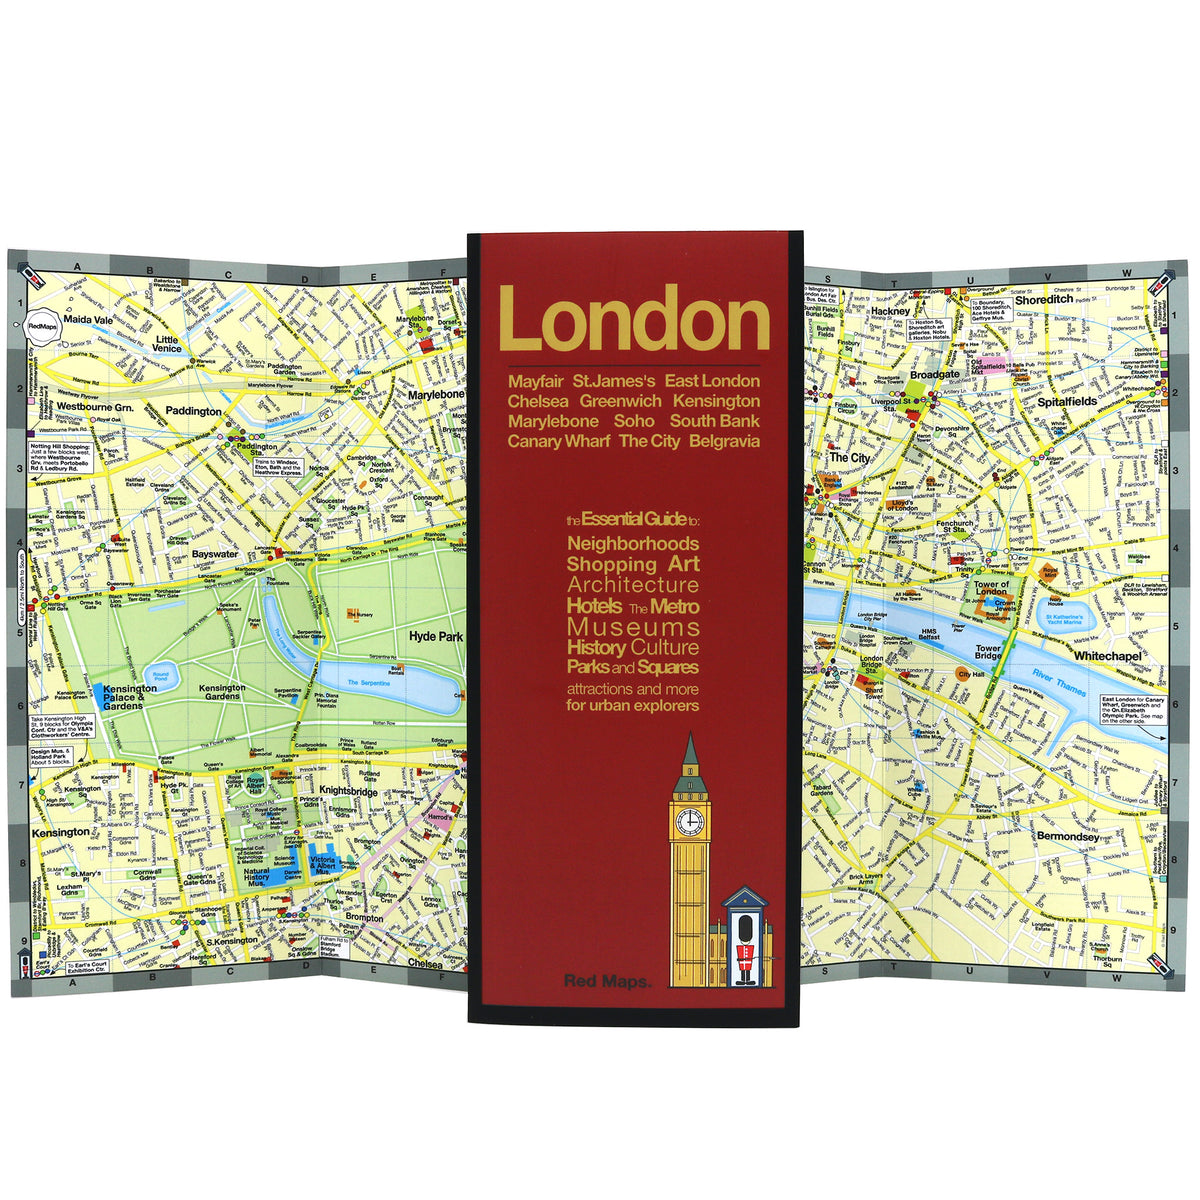 foldout-travel-map-to-central-london-attractions-red-maps